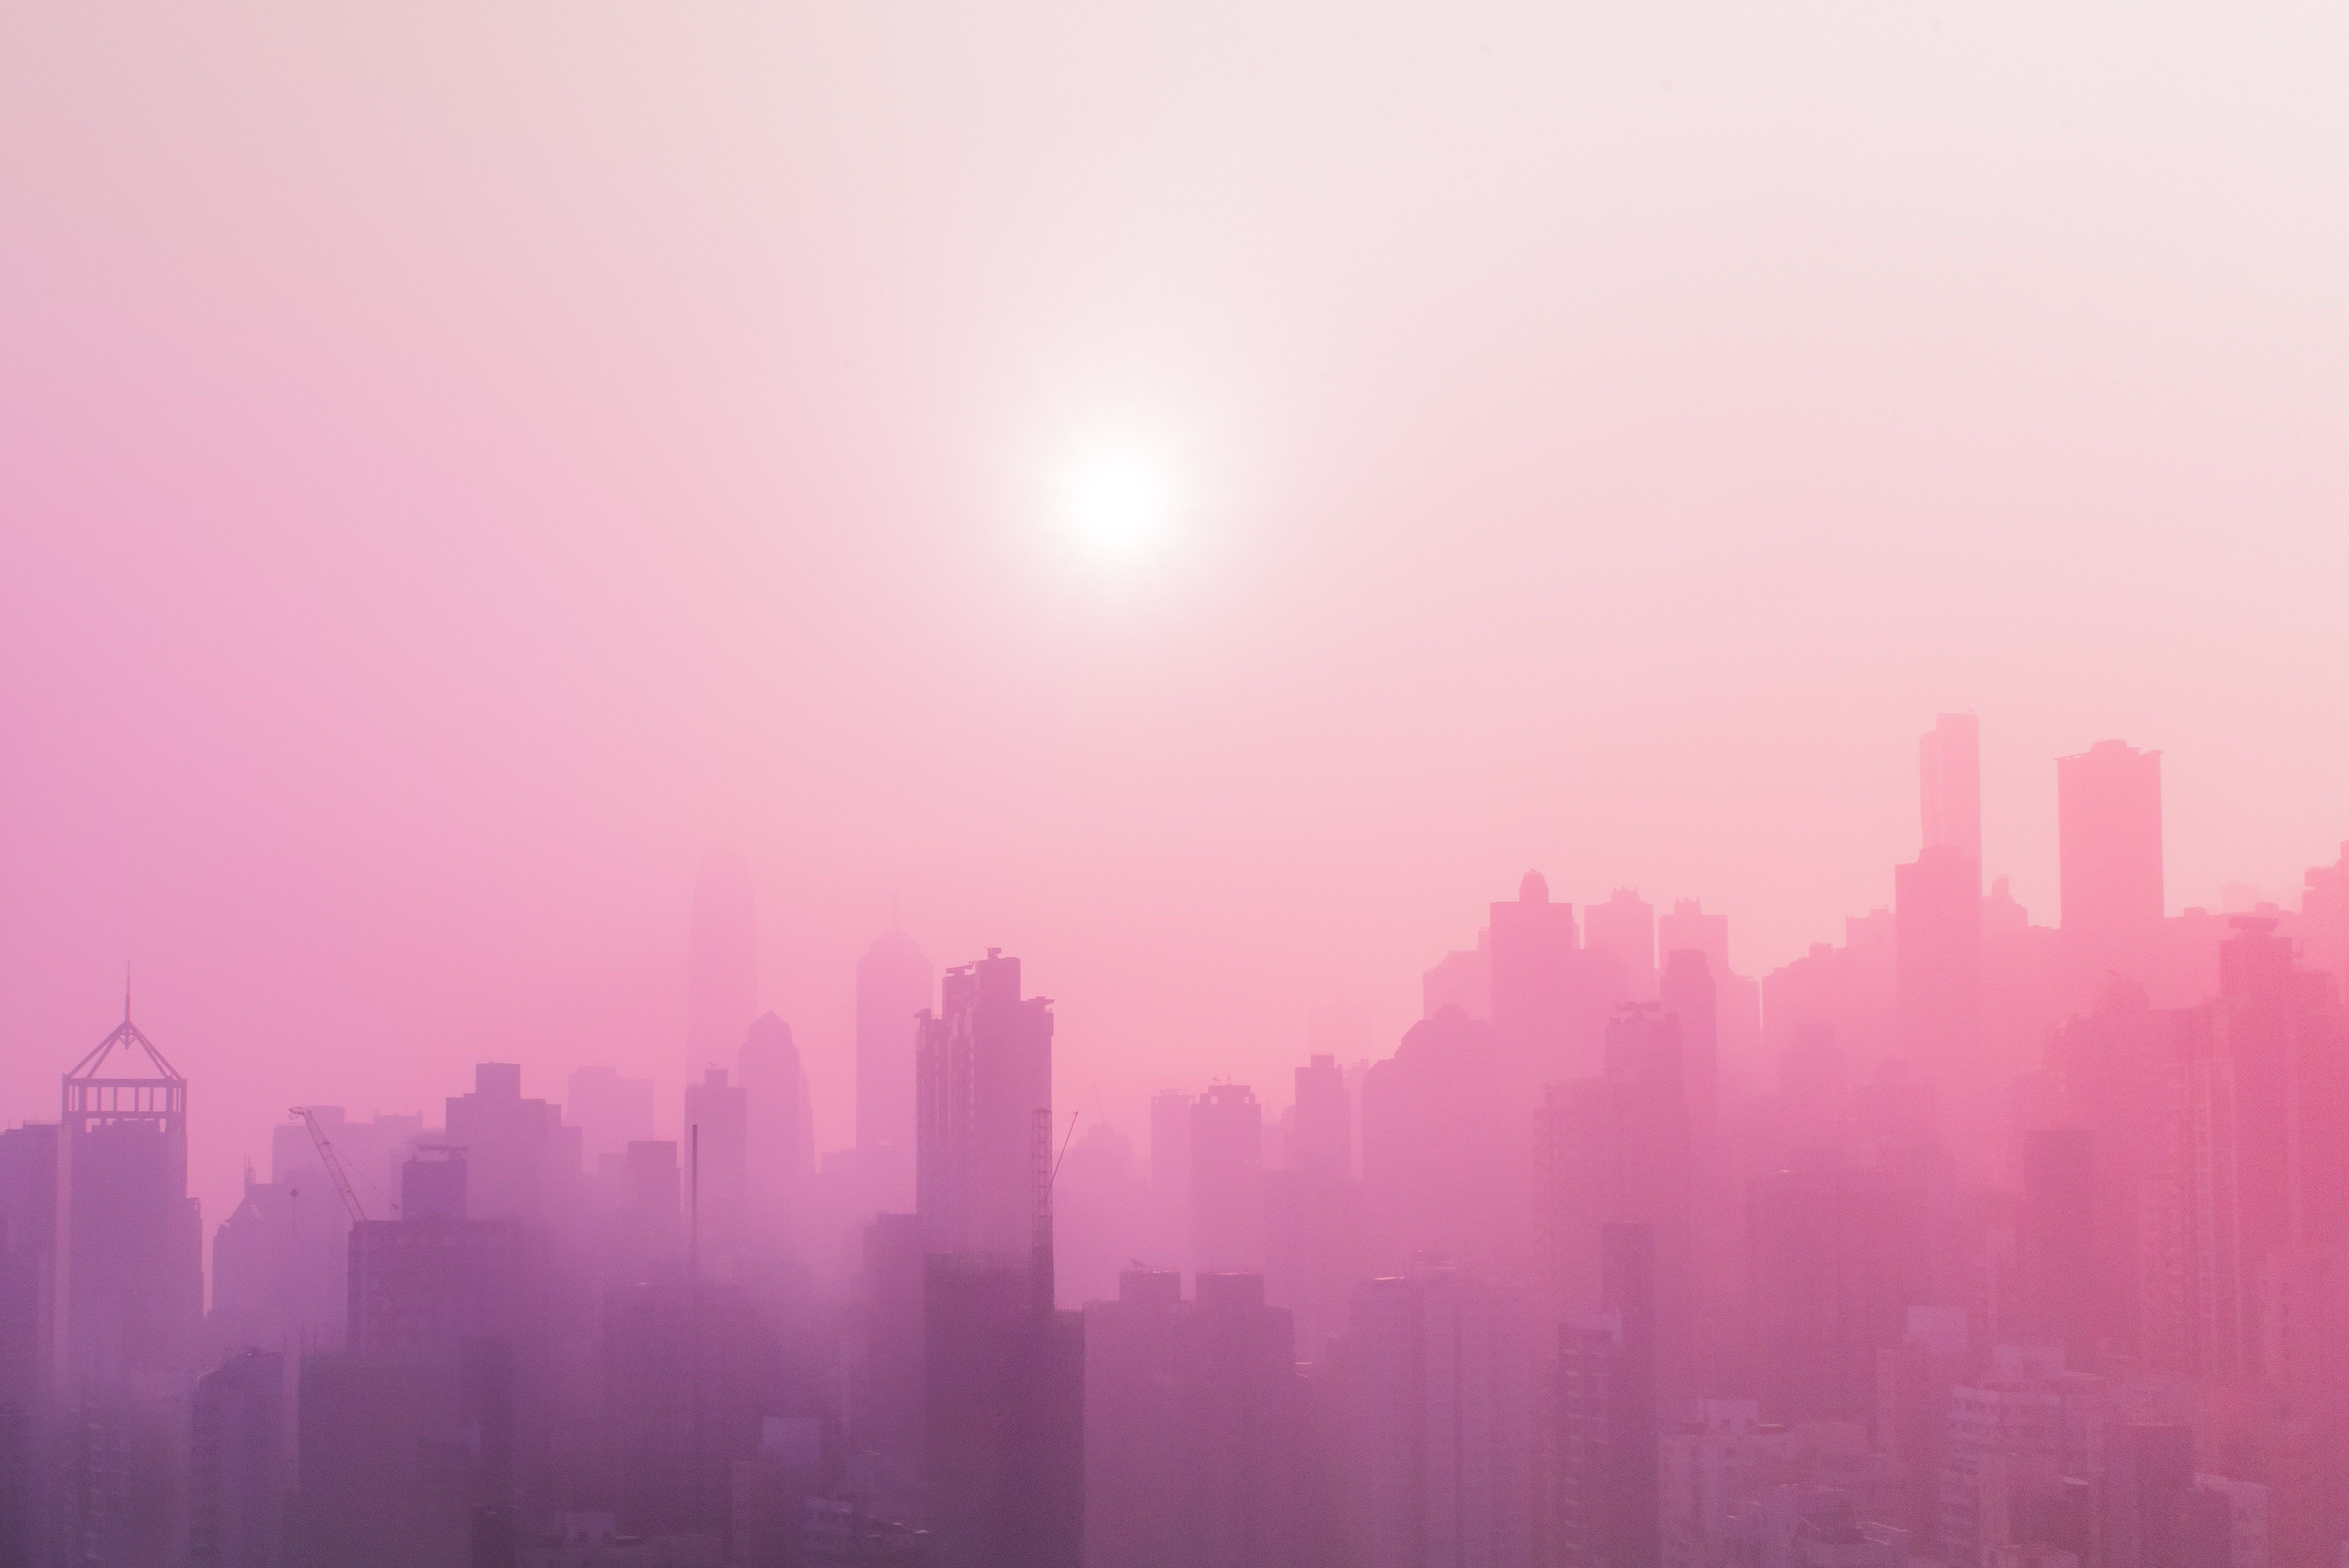 A city skyline is shown in a pink hue. - Hot pink, pink, soft pink